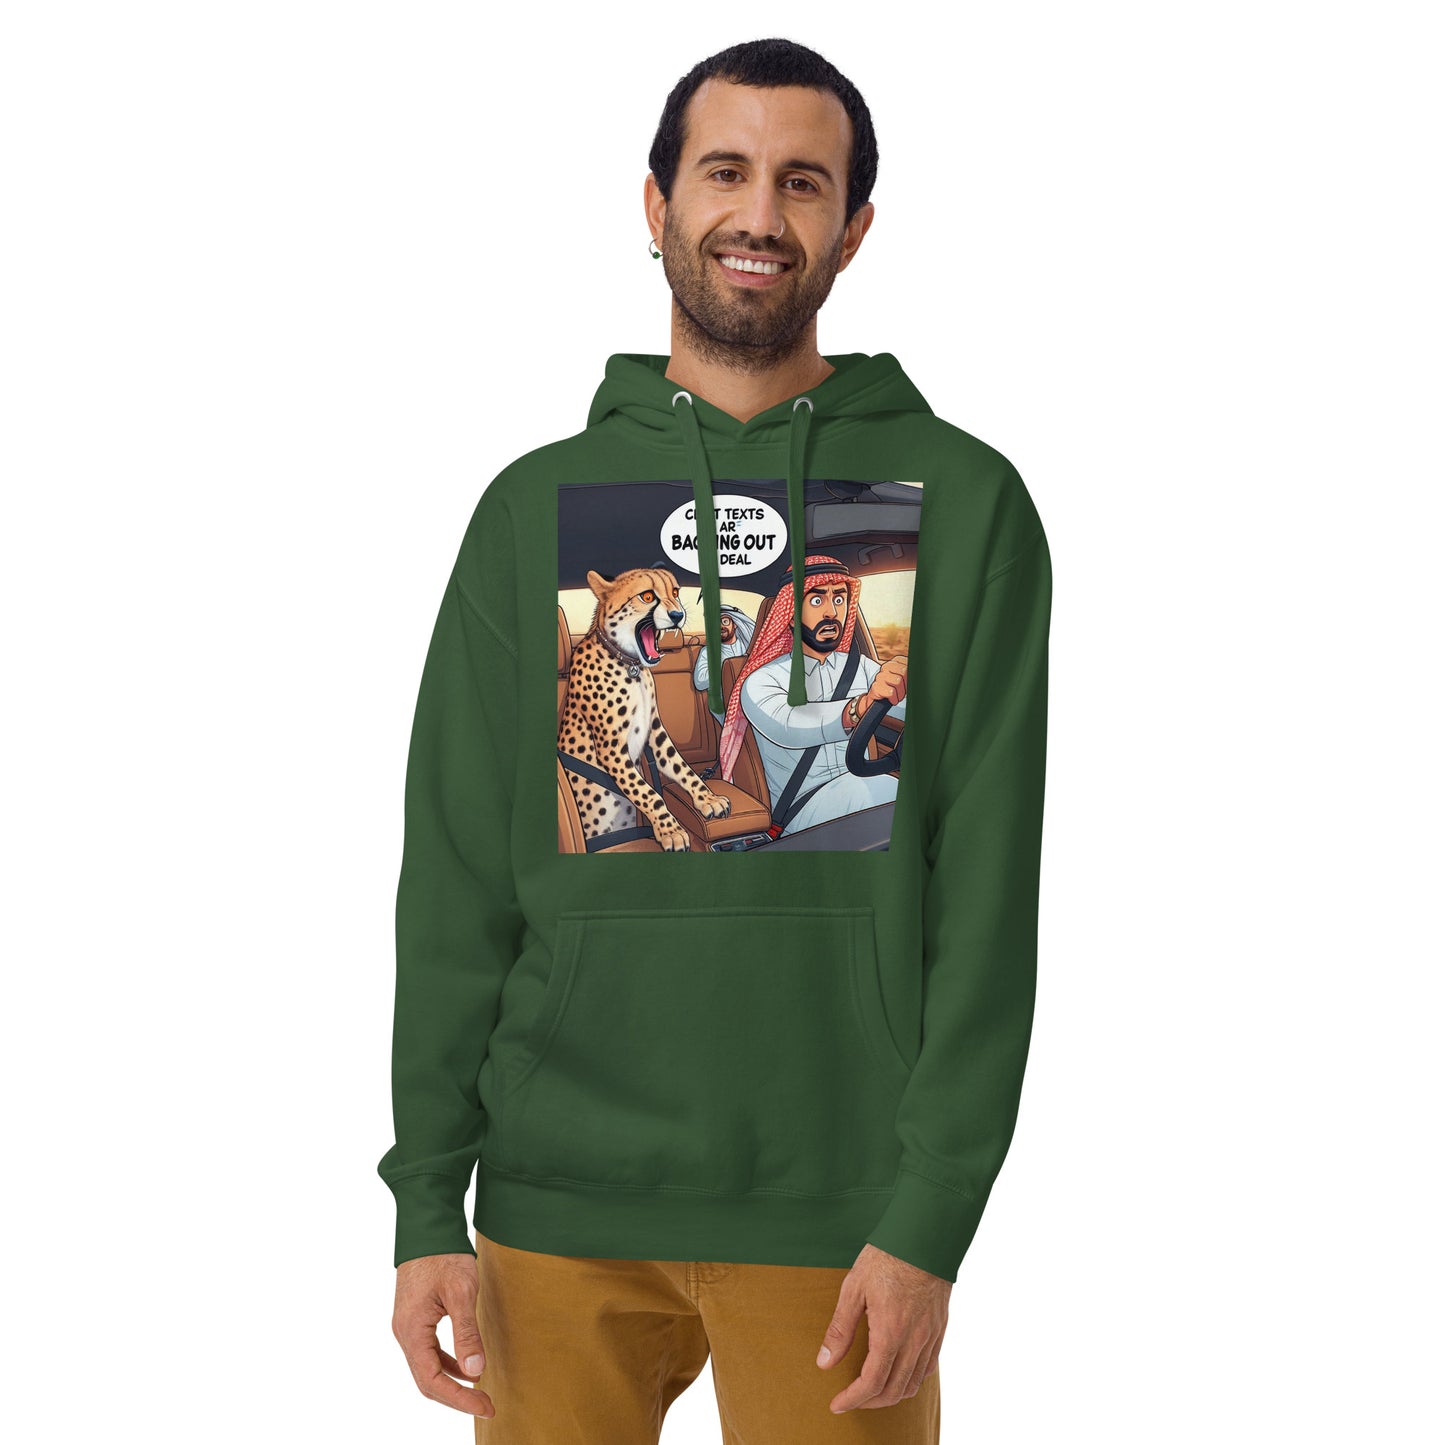 Backing Out of Deal Hoodie - Dark